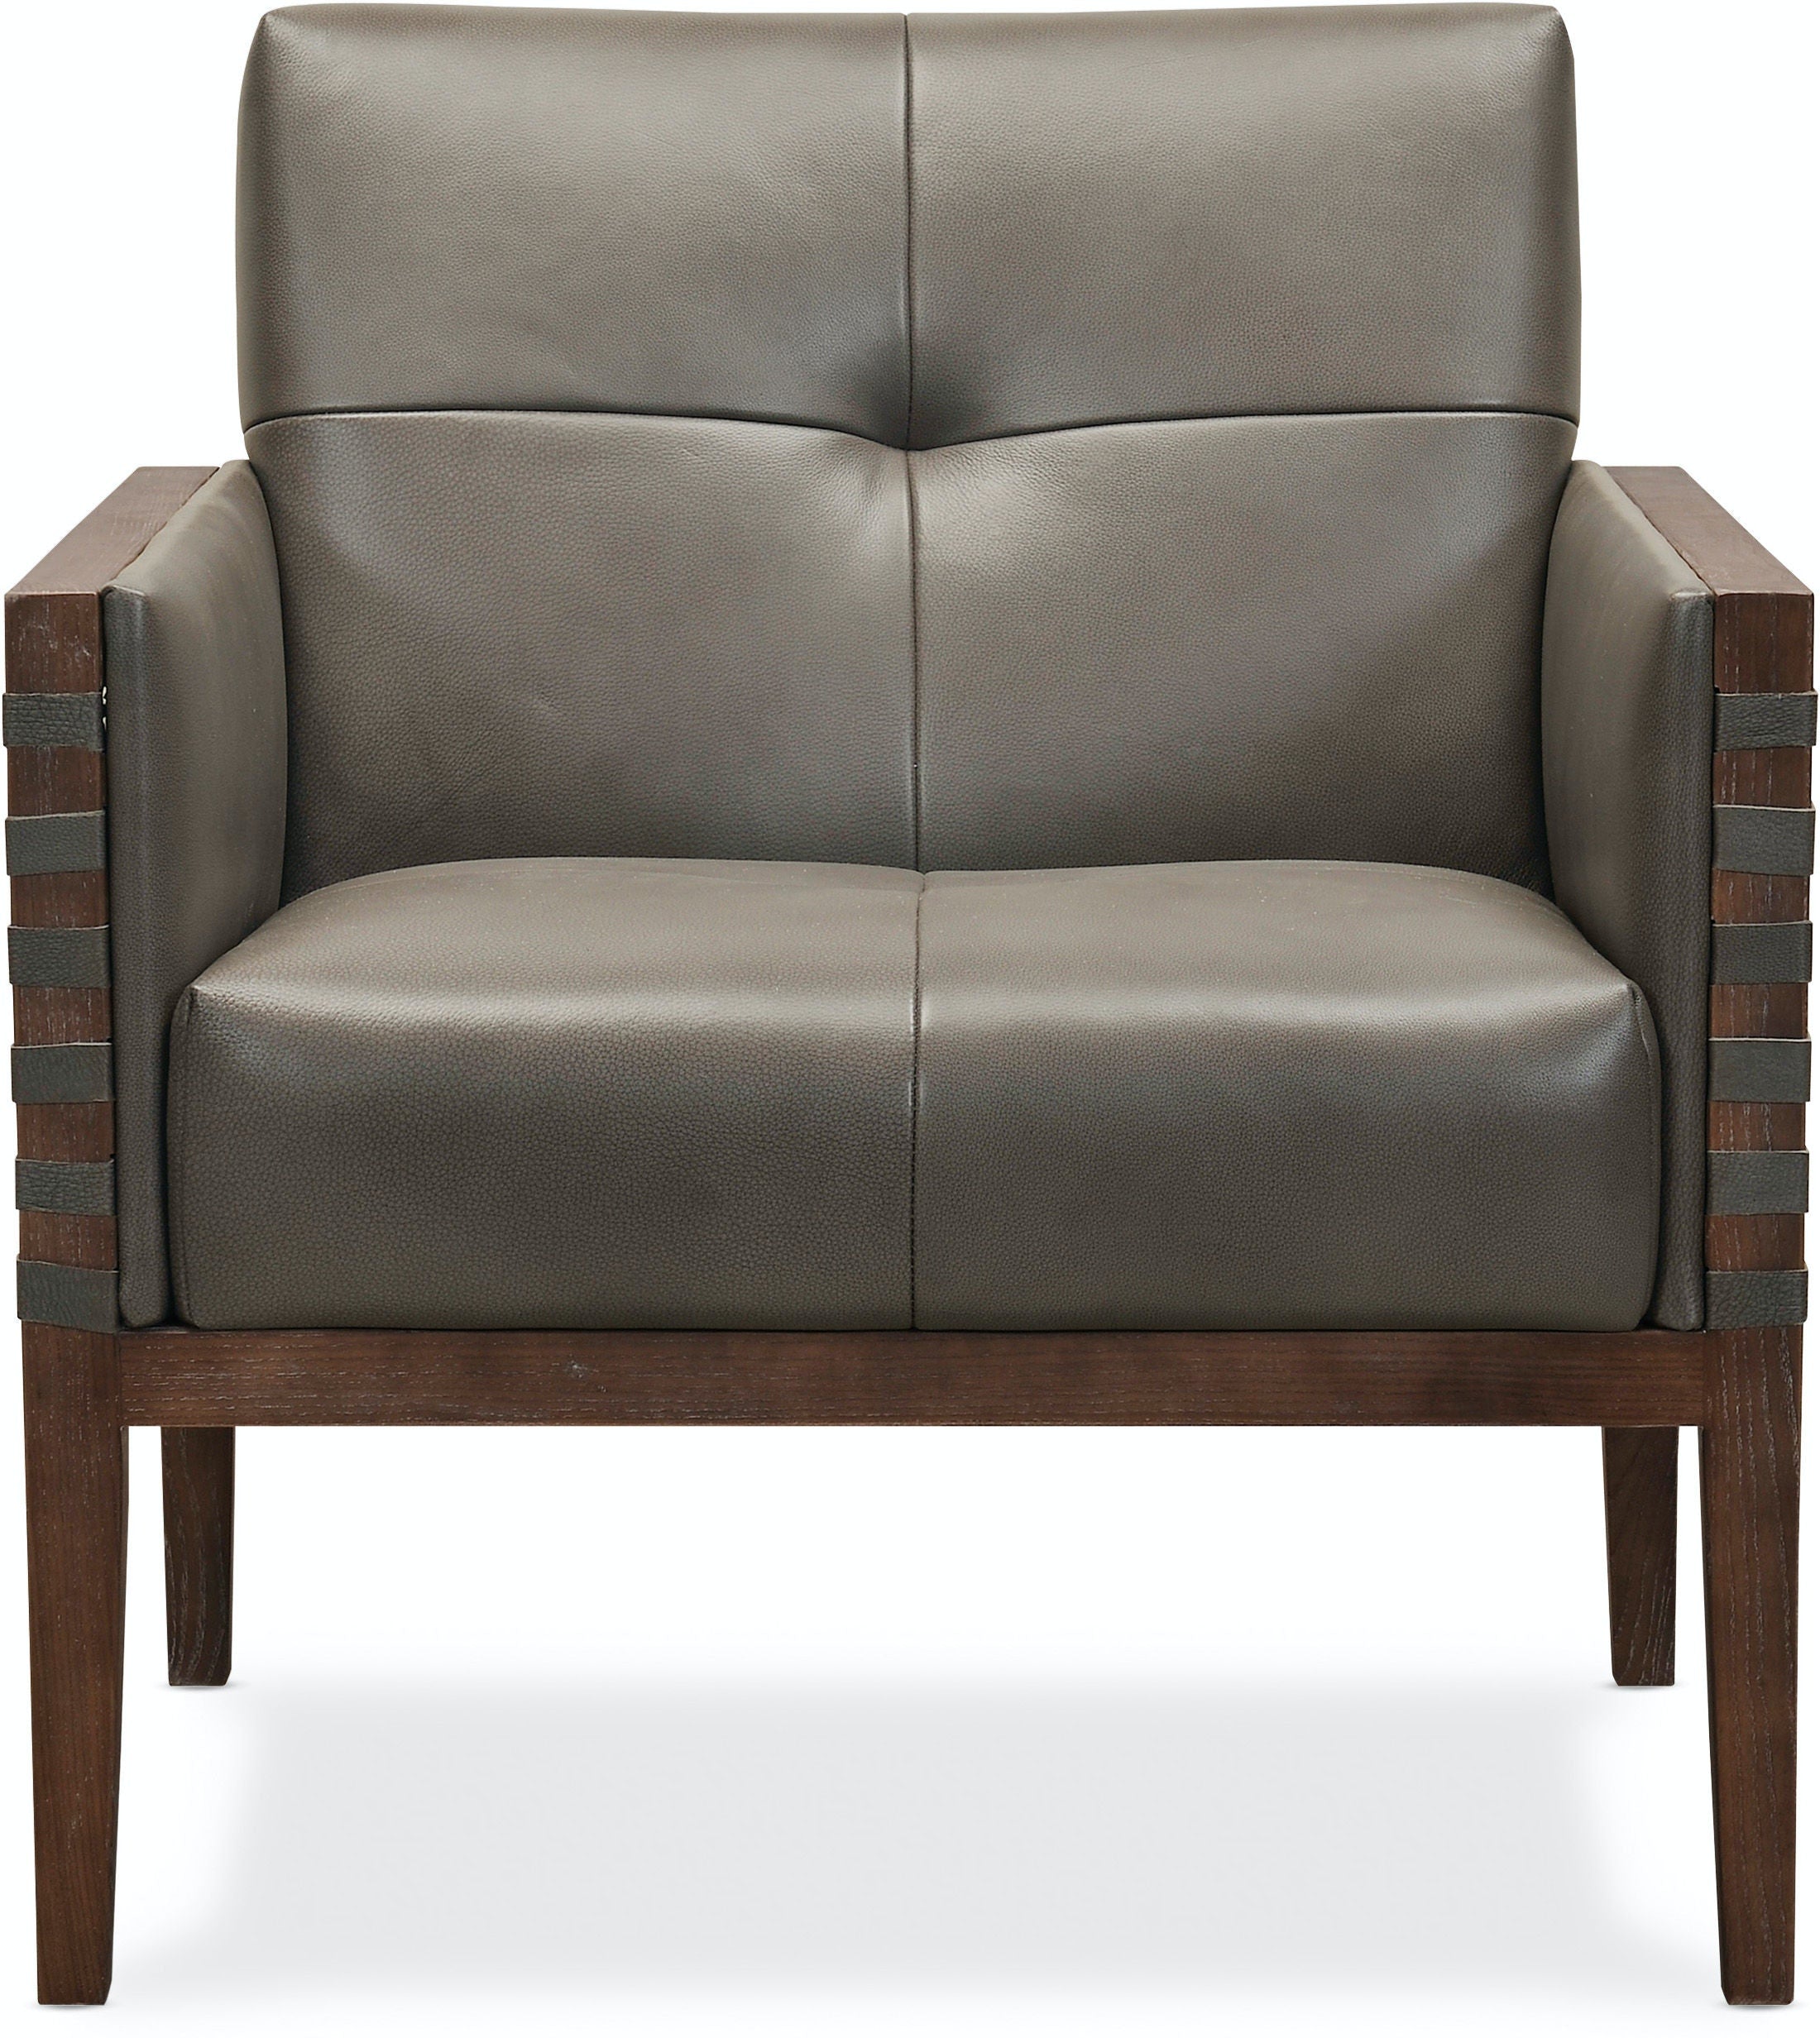 Hooker Furniture Leather Club Chair with Wood Frame